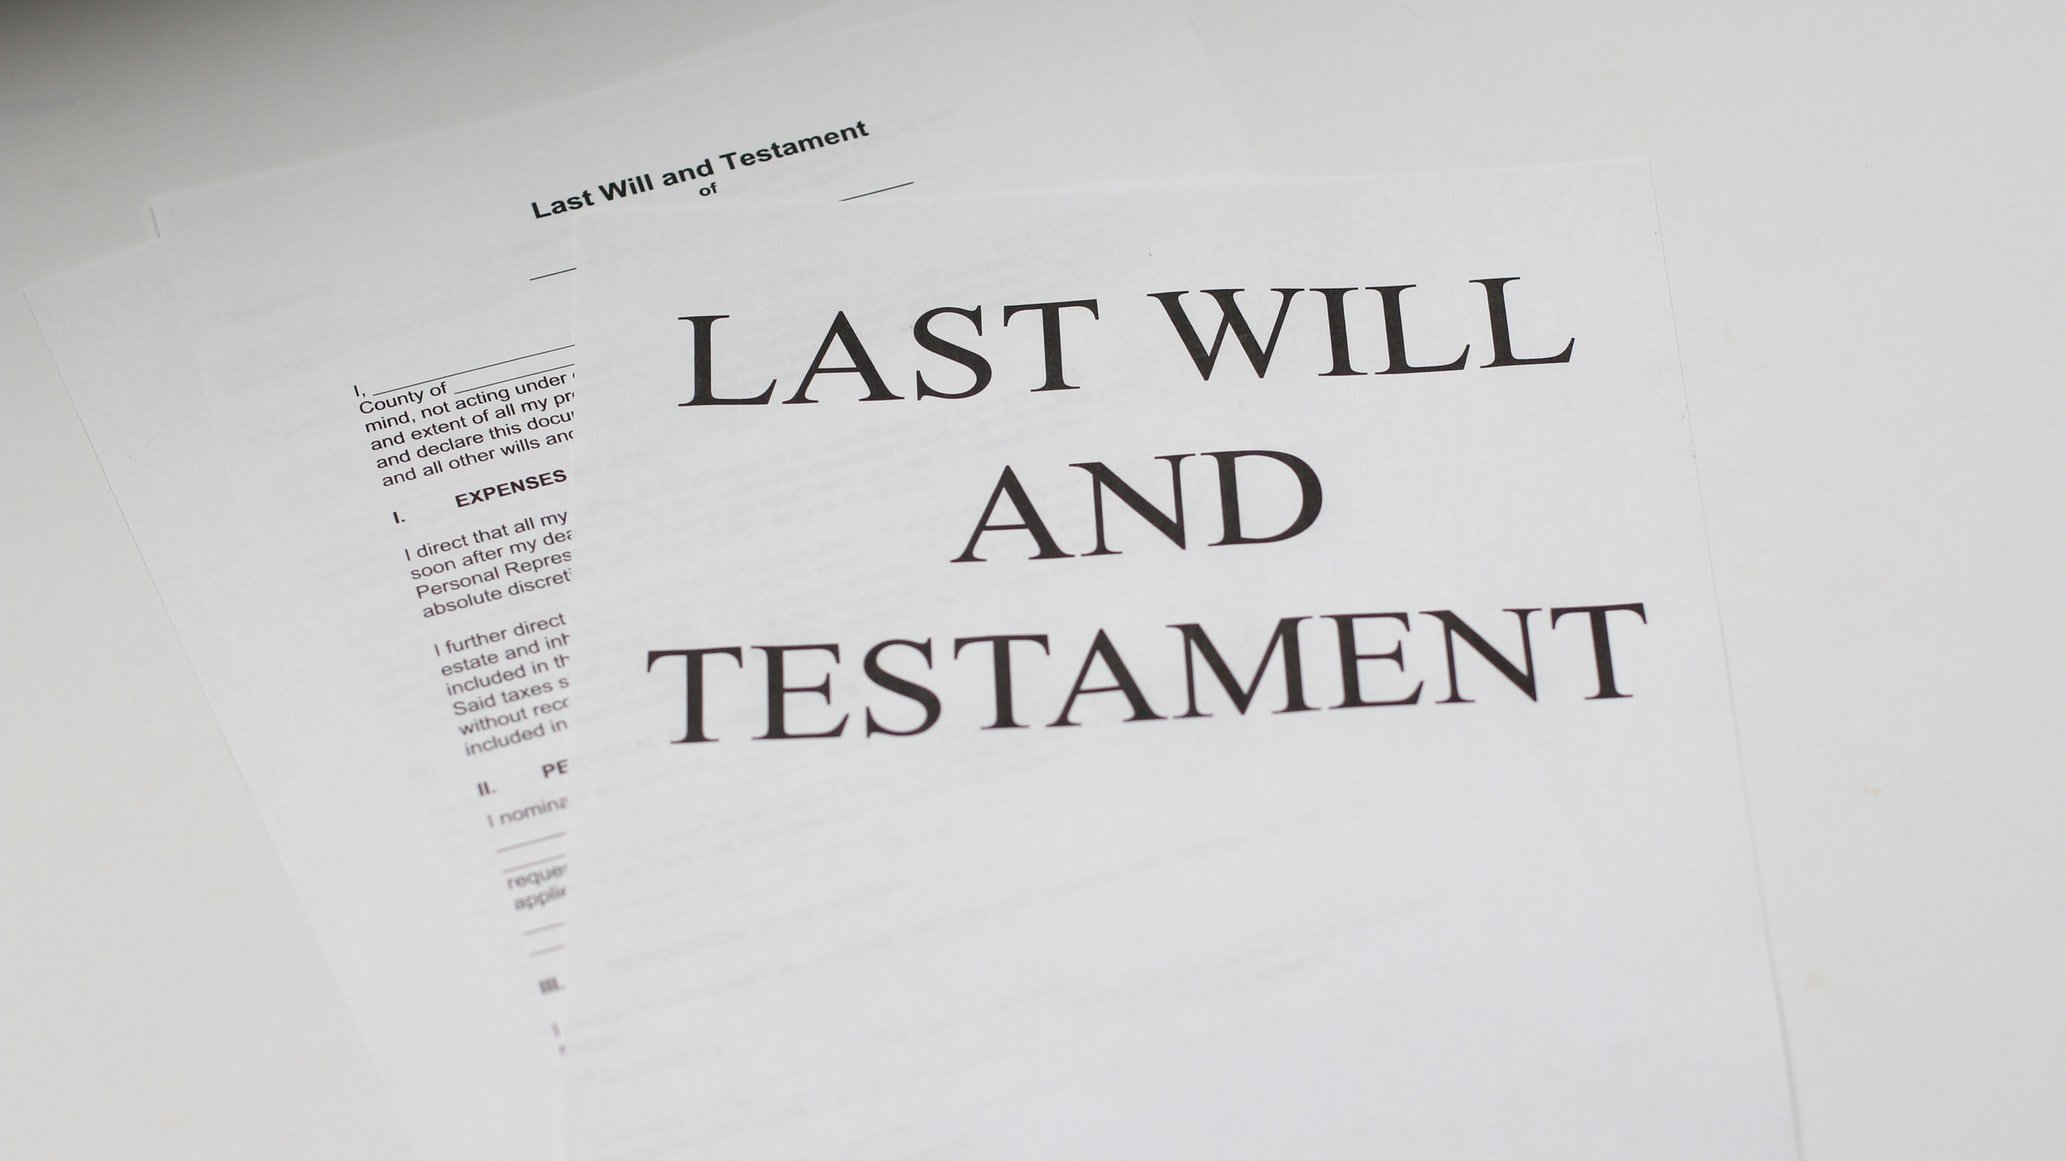 Papers bearing the title "Last Will and Testament." | Source: Unsplash